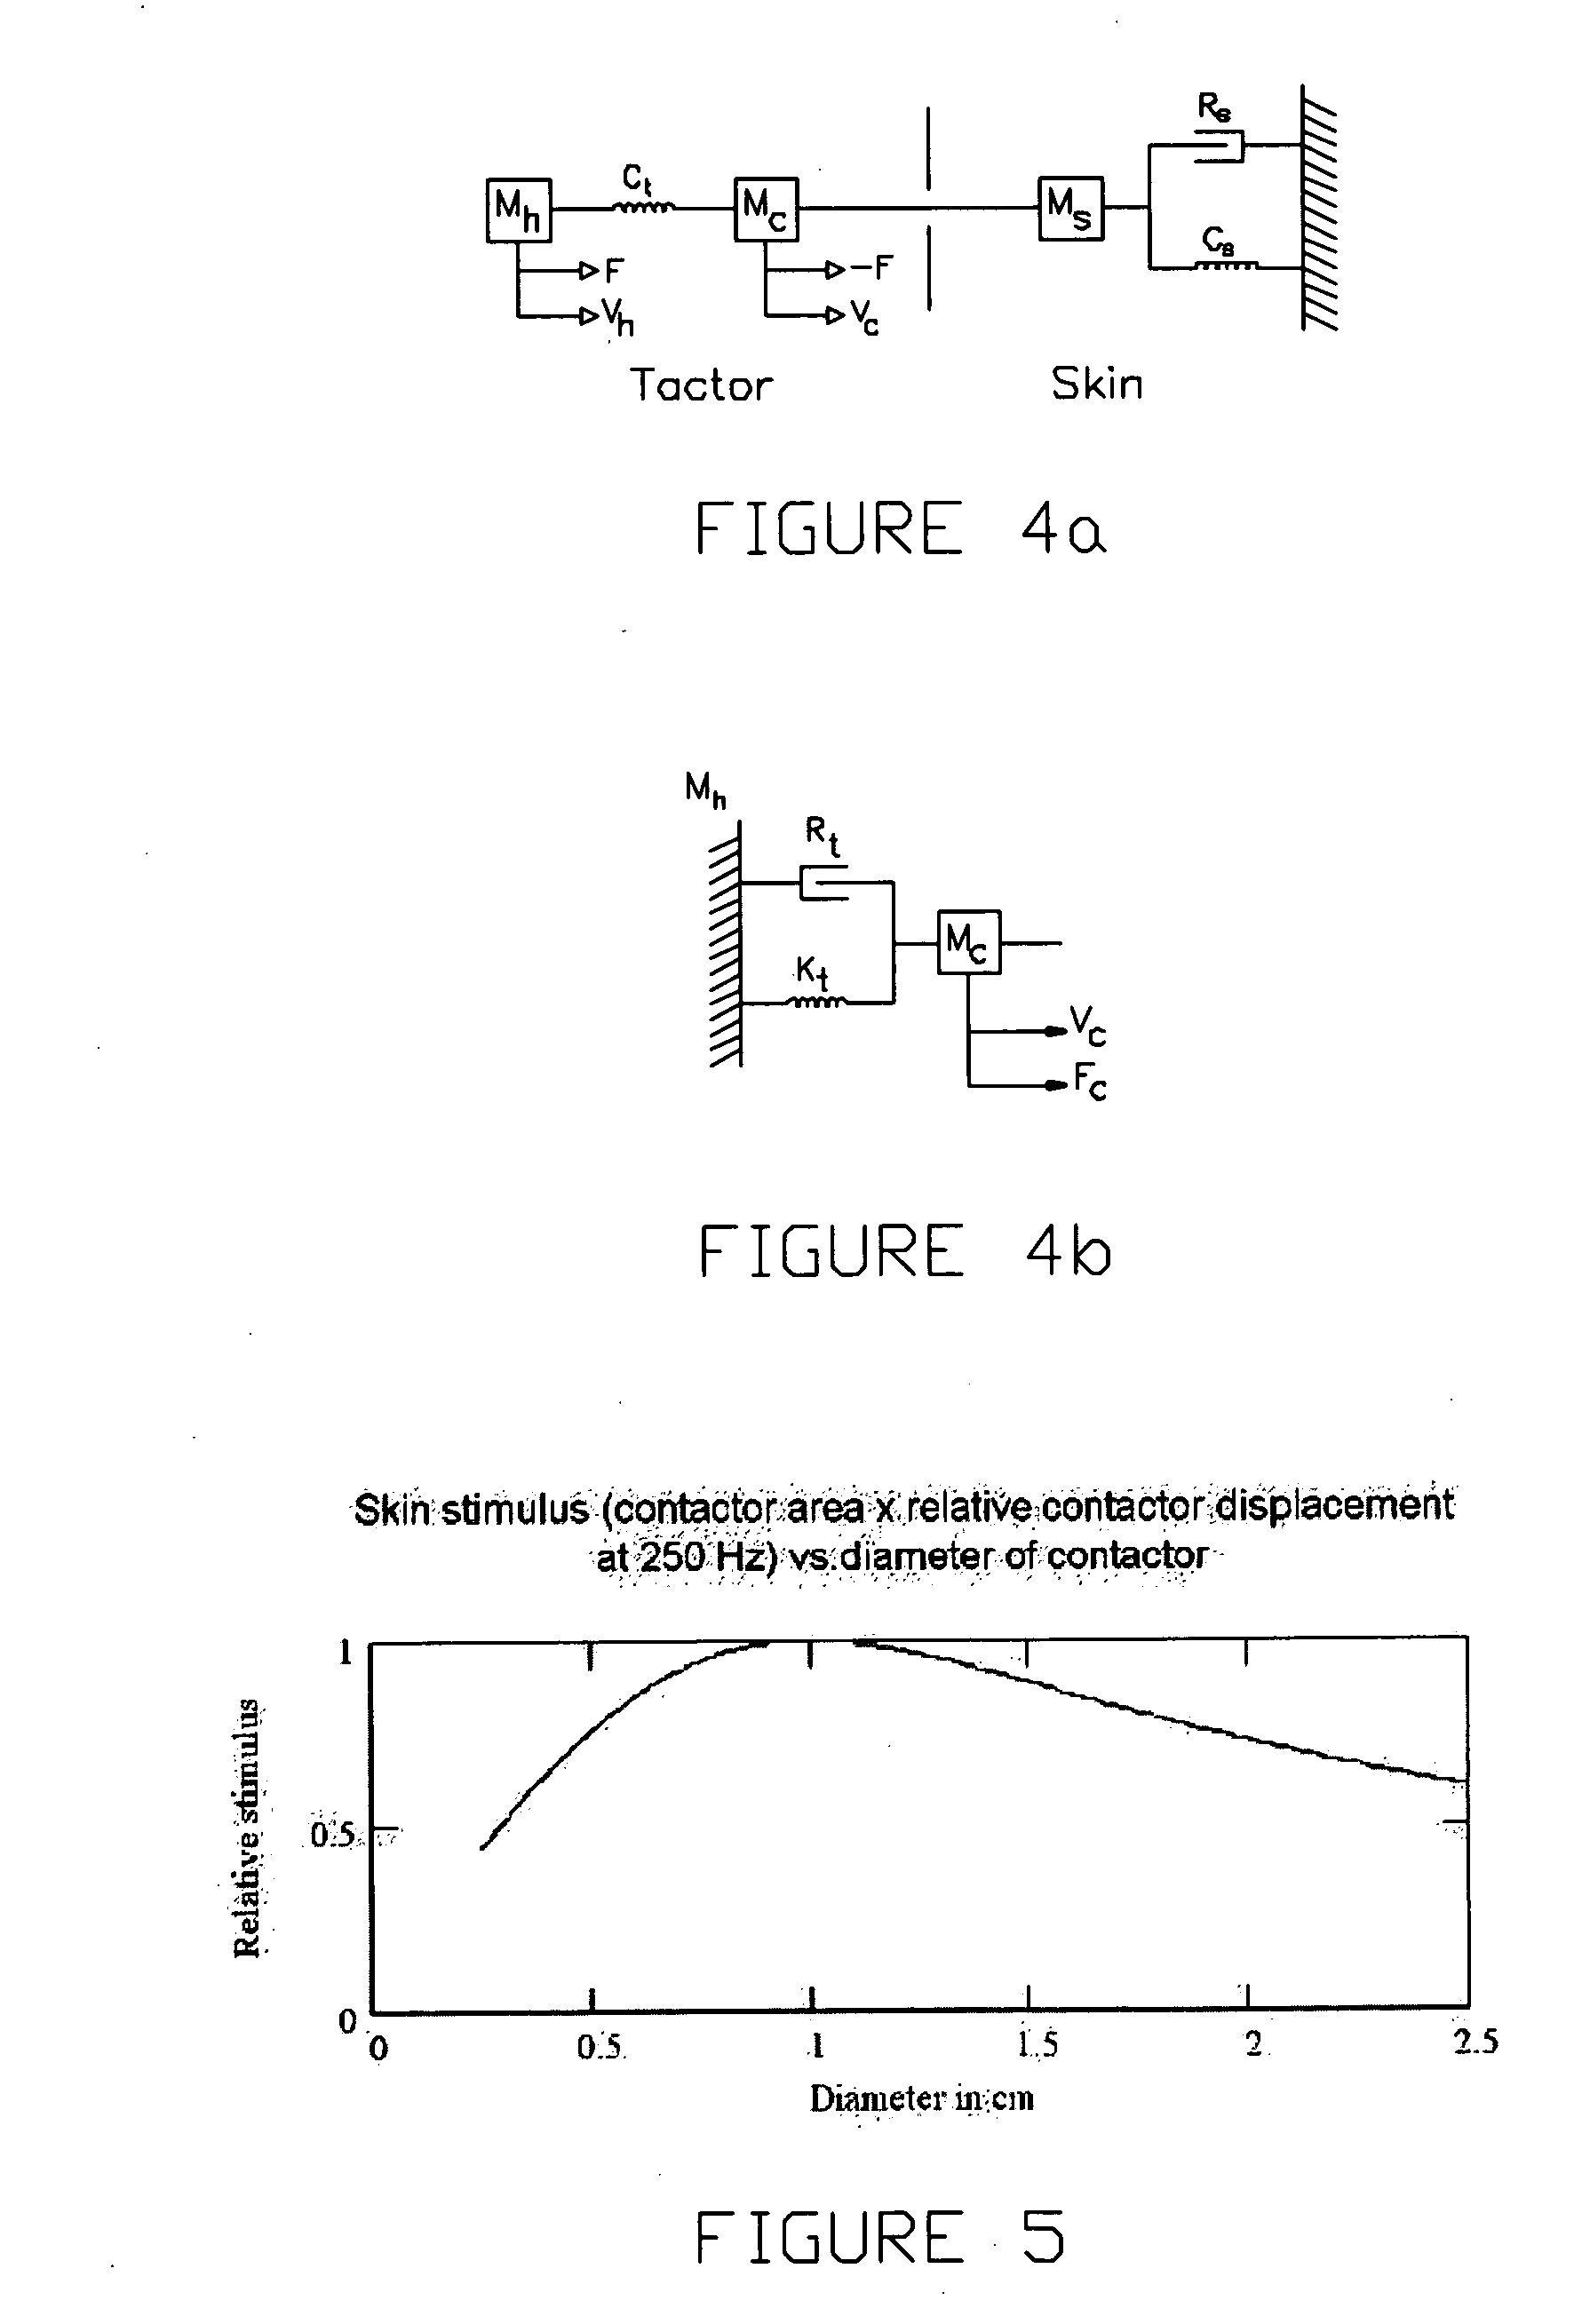 Method and apparatus for generating a vibrational stimulus